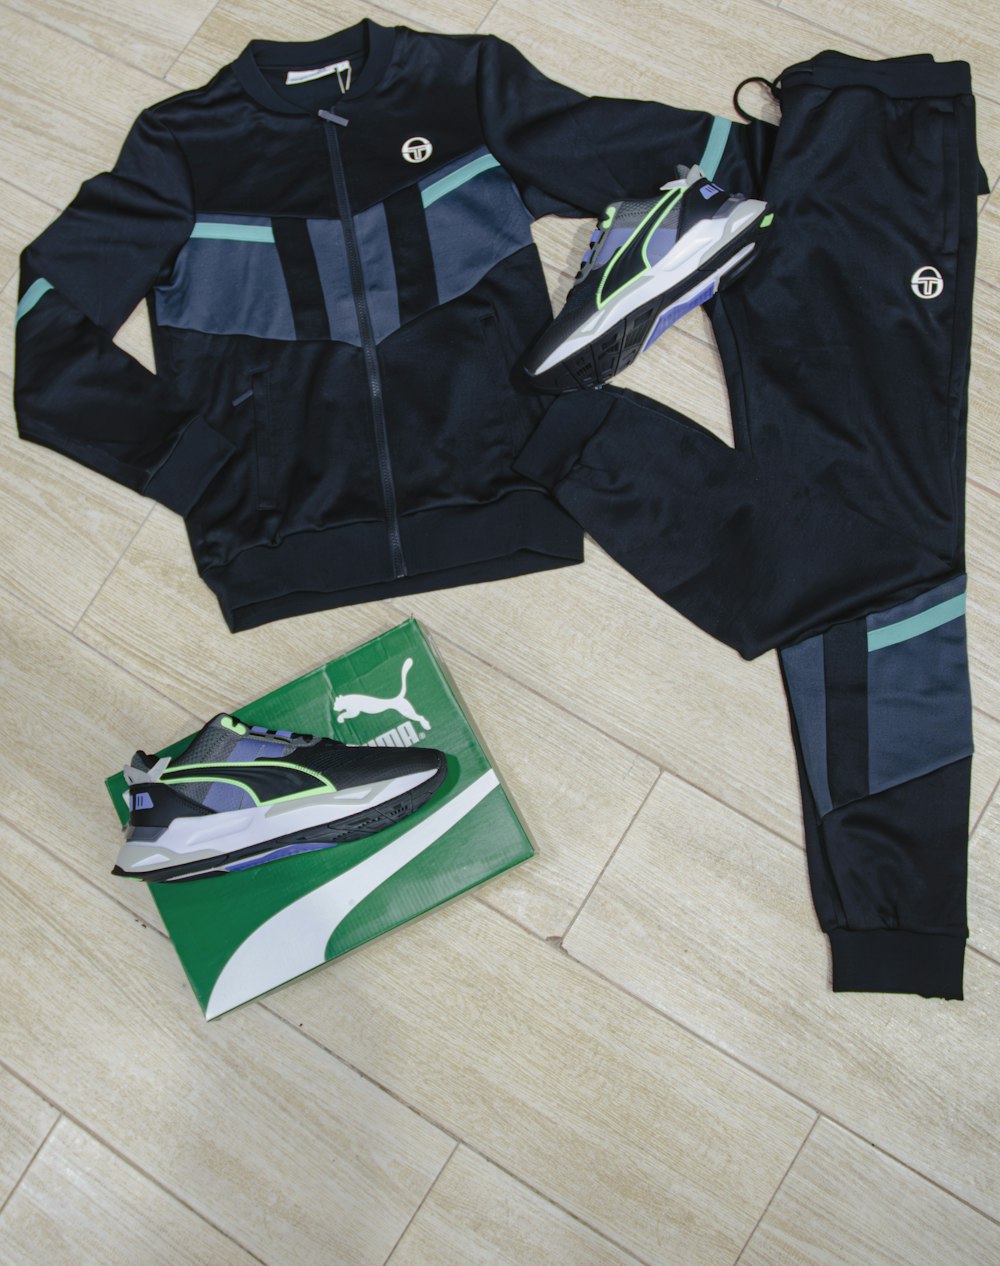 a pair of black and blue tracksuits sitting on a wooden floor